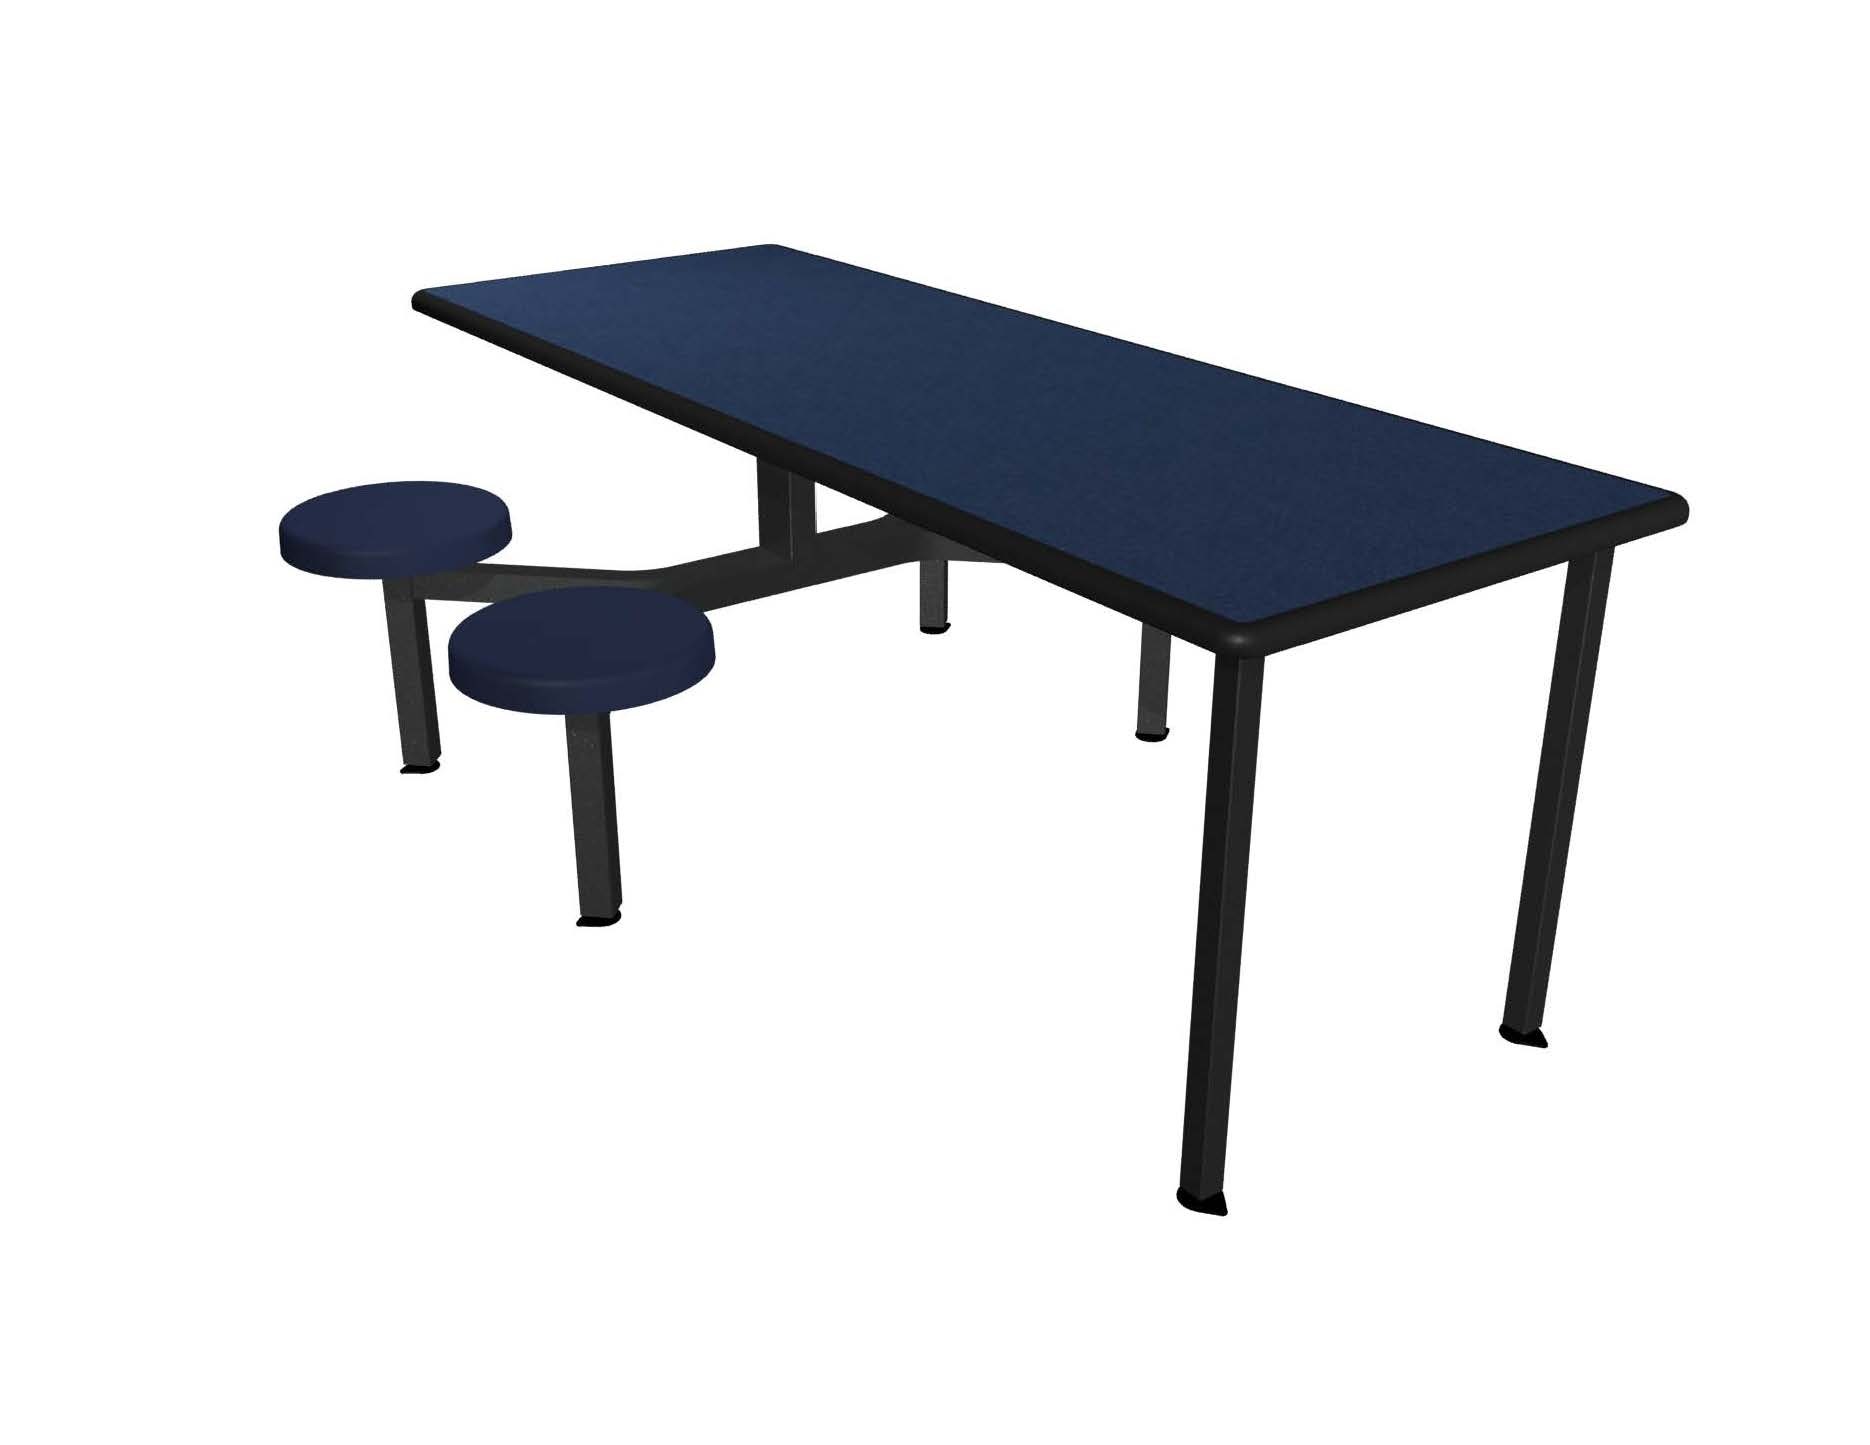 Navy Legacy laminate table top, Black Dur-A-Edge®, Composite button seat in Navy